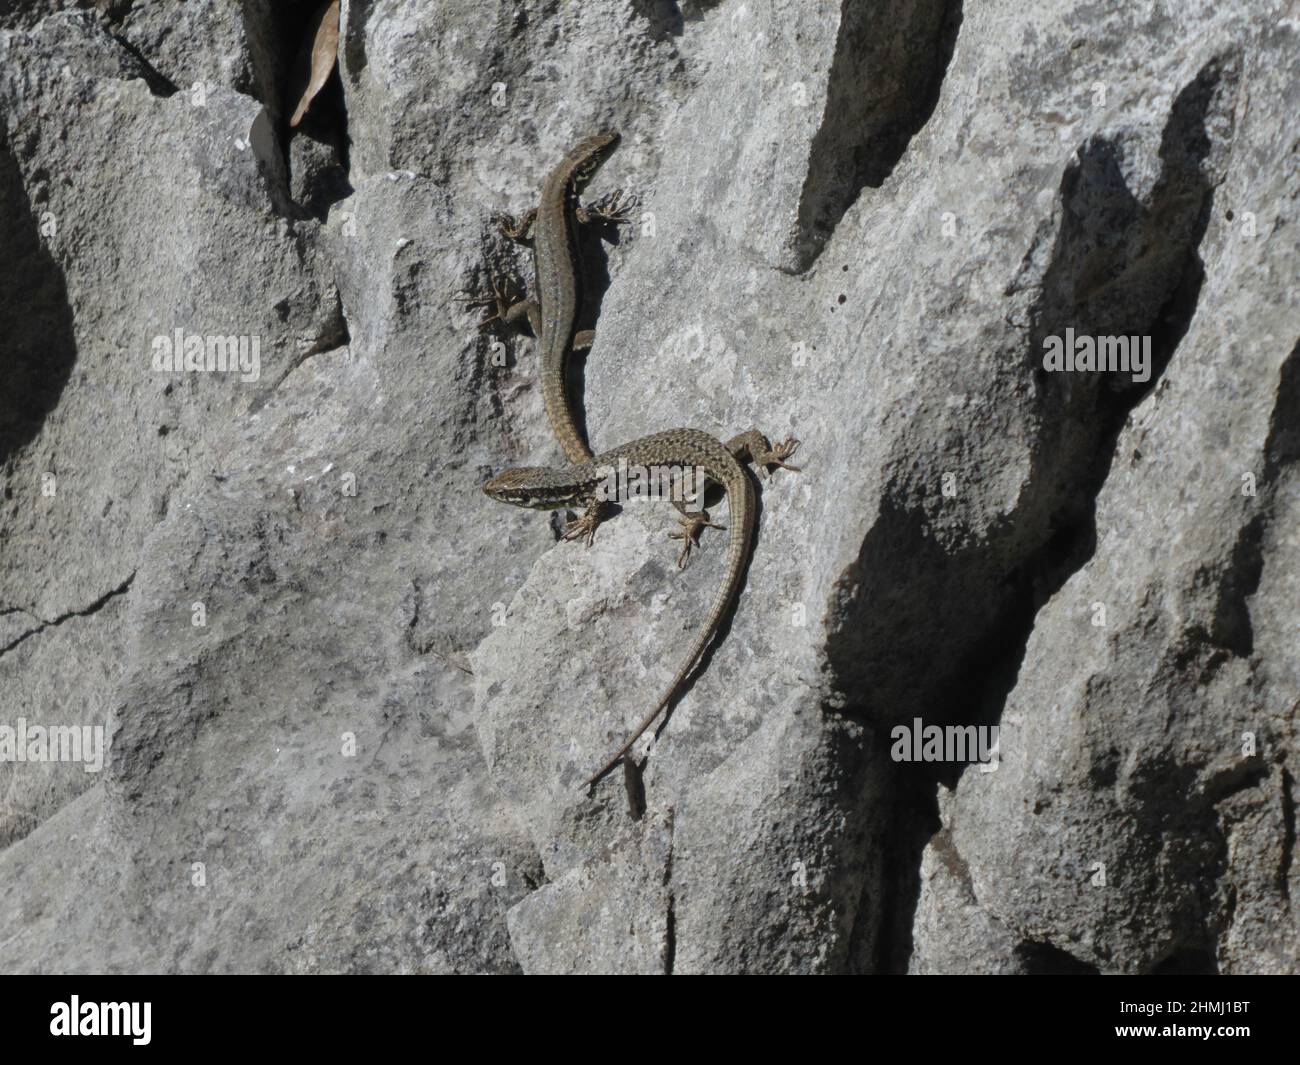 Two lizards on sunny rock Stock Photo